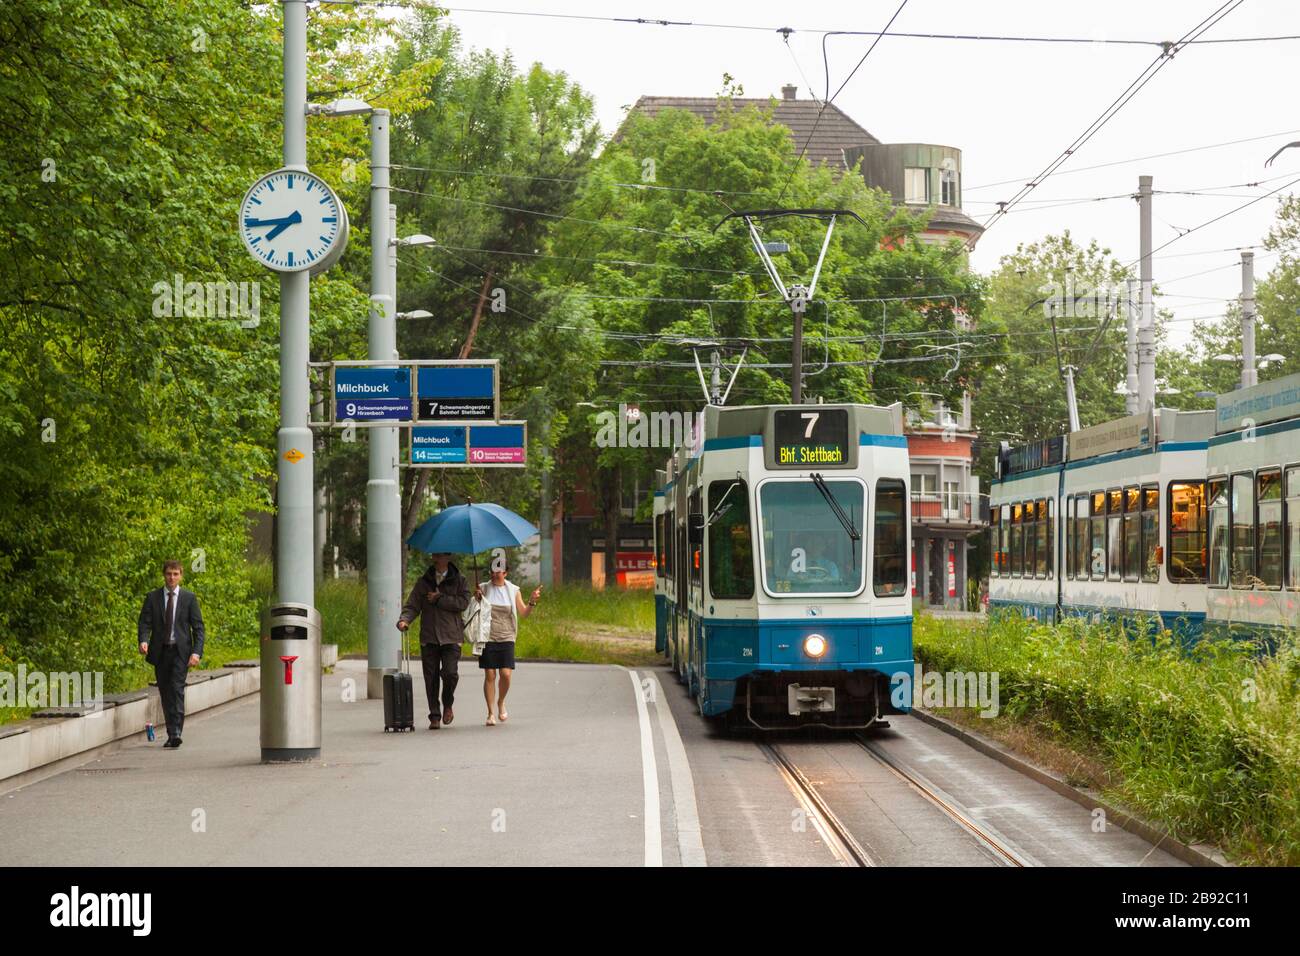 People walk briskly to catch the incoming tram at the Milchbuck station in Zürich, Switzerland. Stock Photo